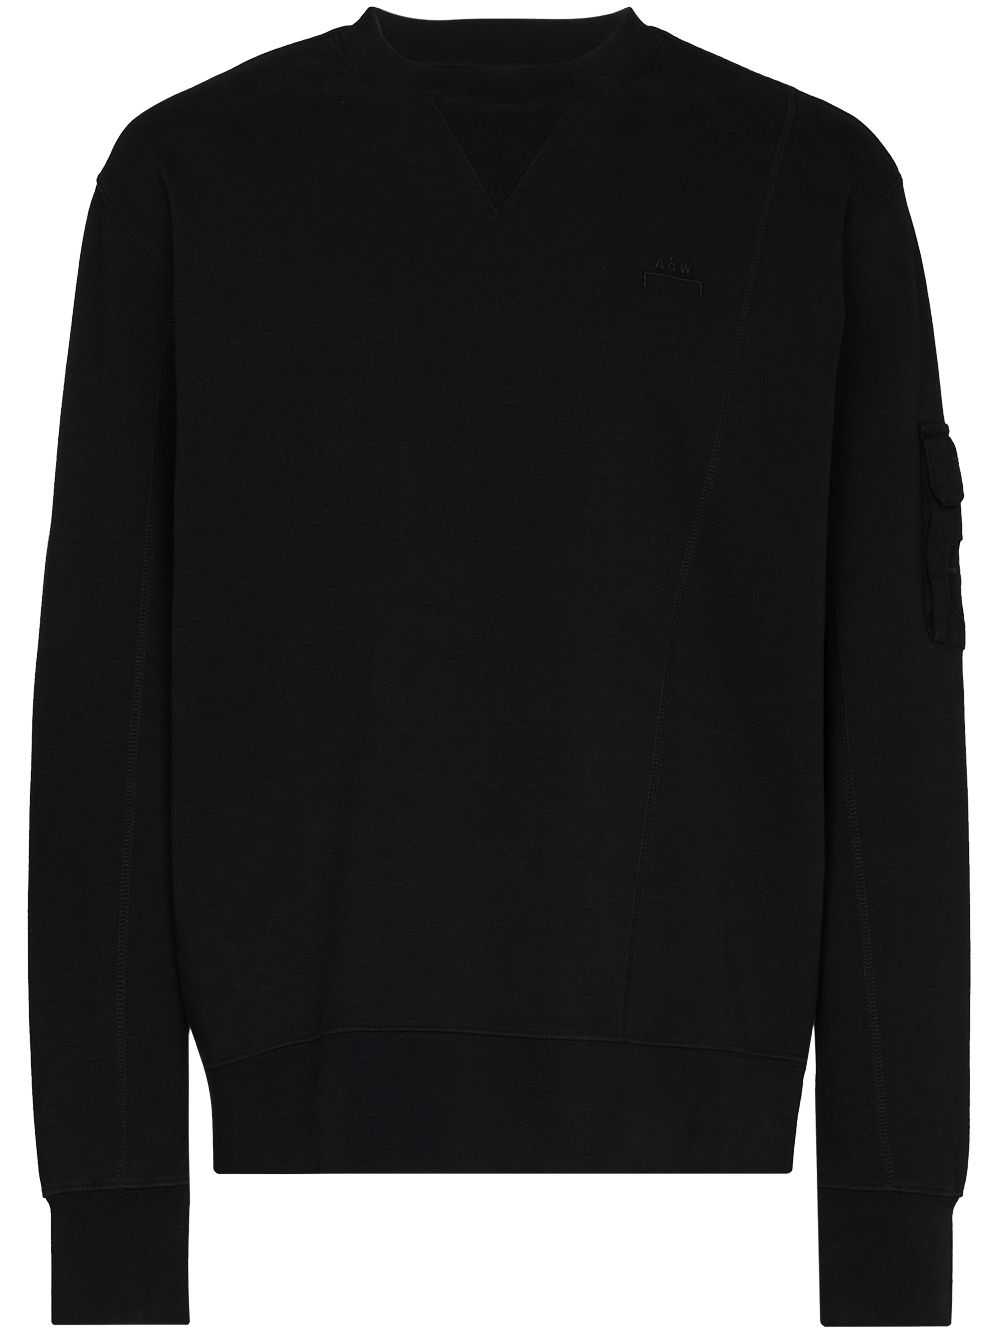 A-COLD-WALL* Essential logo-embroidered sweatshirt - Black von A-COLD-WALL*